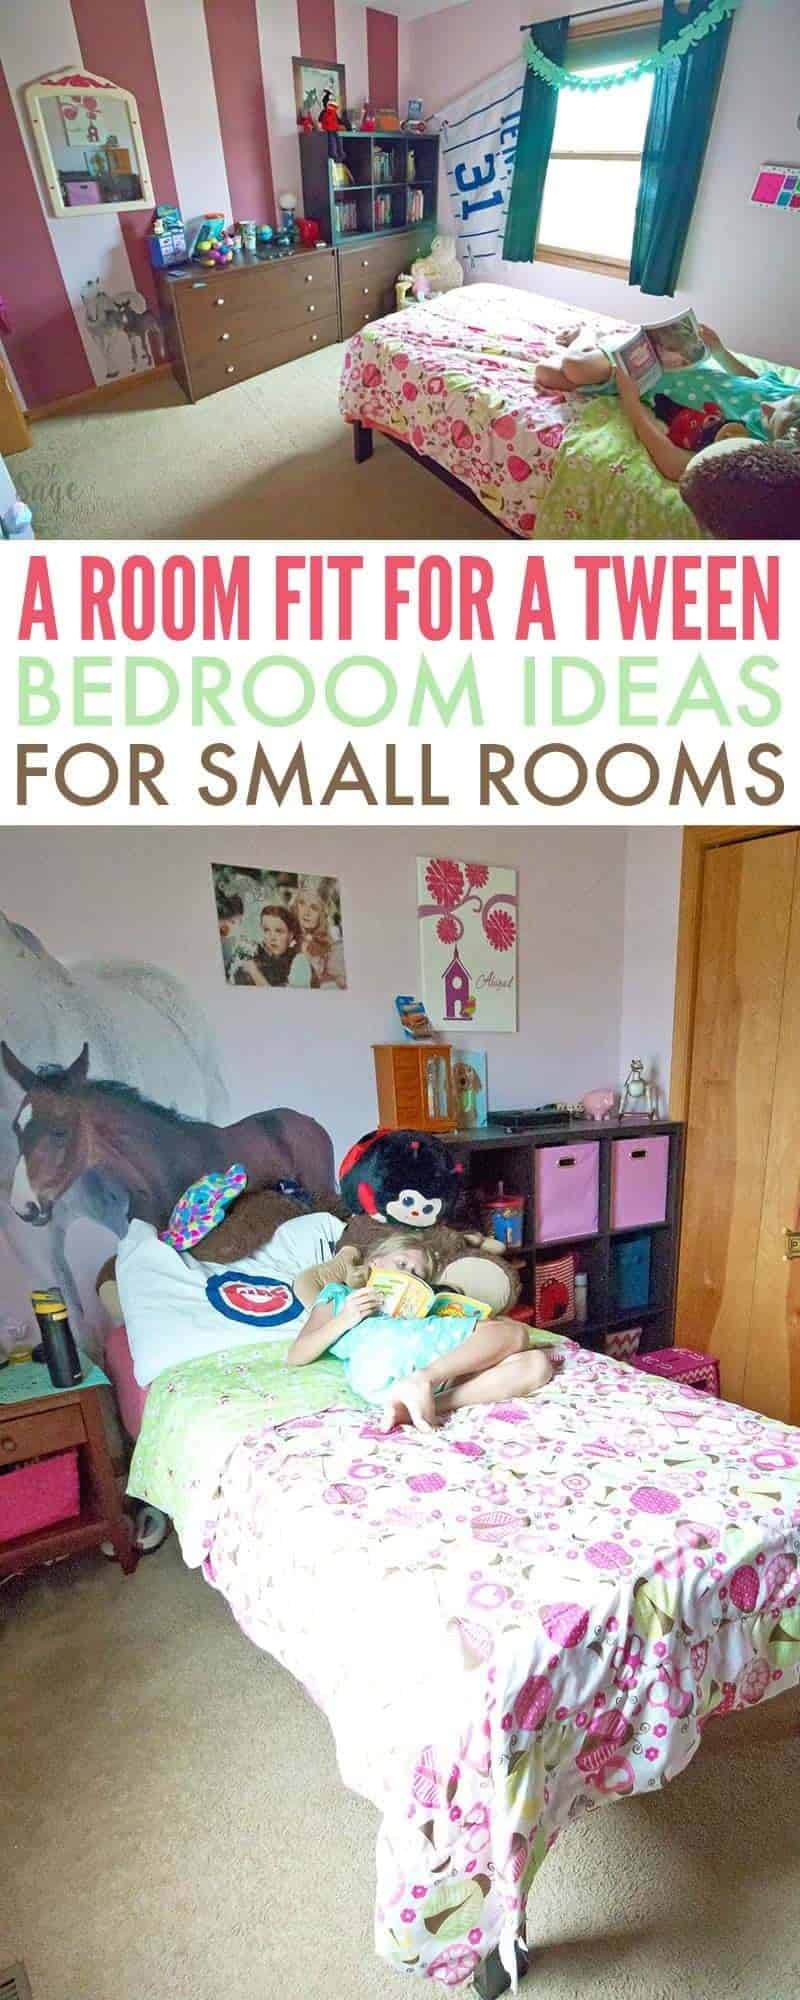  Tween  Girl  Bedroom  Ideas  for Small Rooms A Room  Fit for 